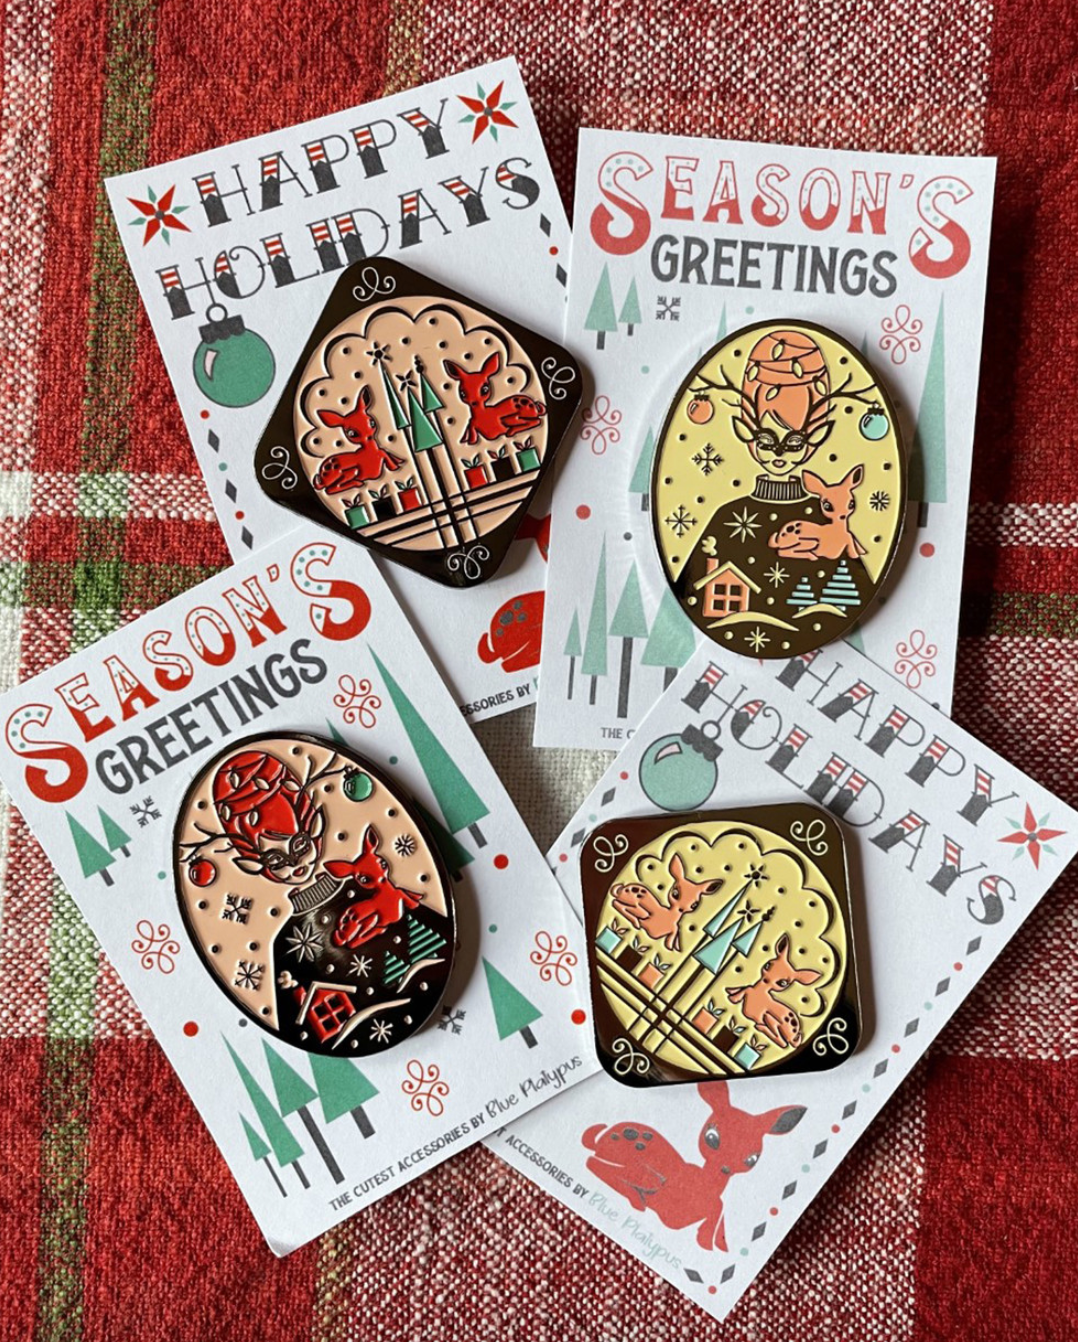 Set of 4 vintage holiday themed pins with reindeer, pine trees, gifts and putz houses